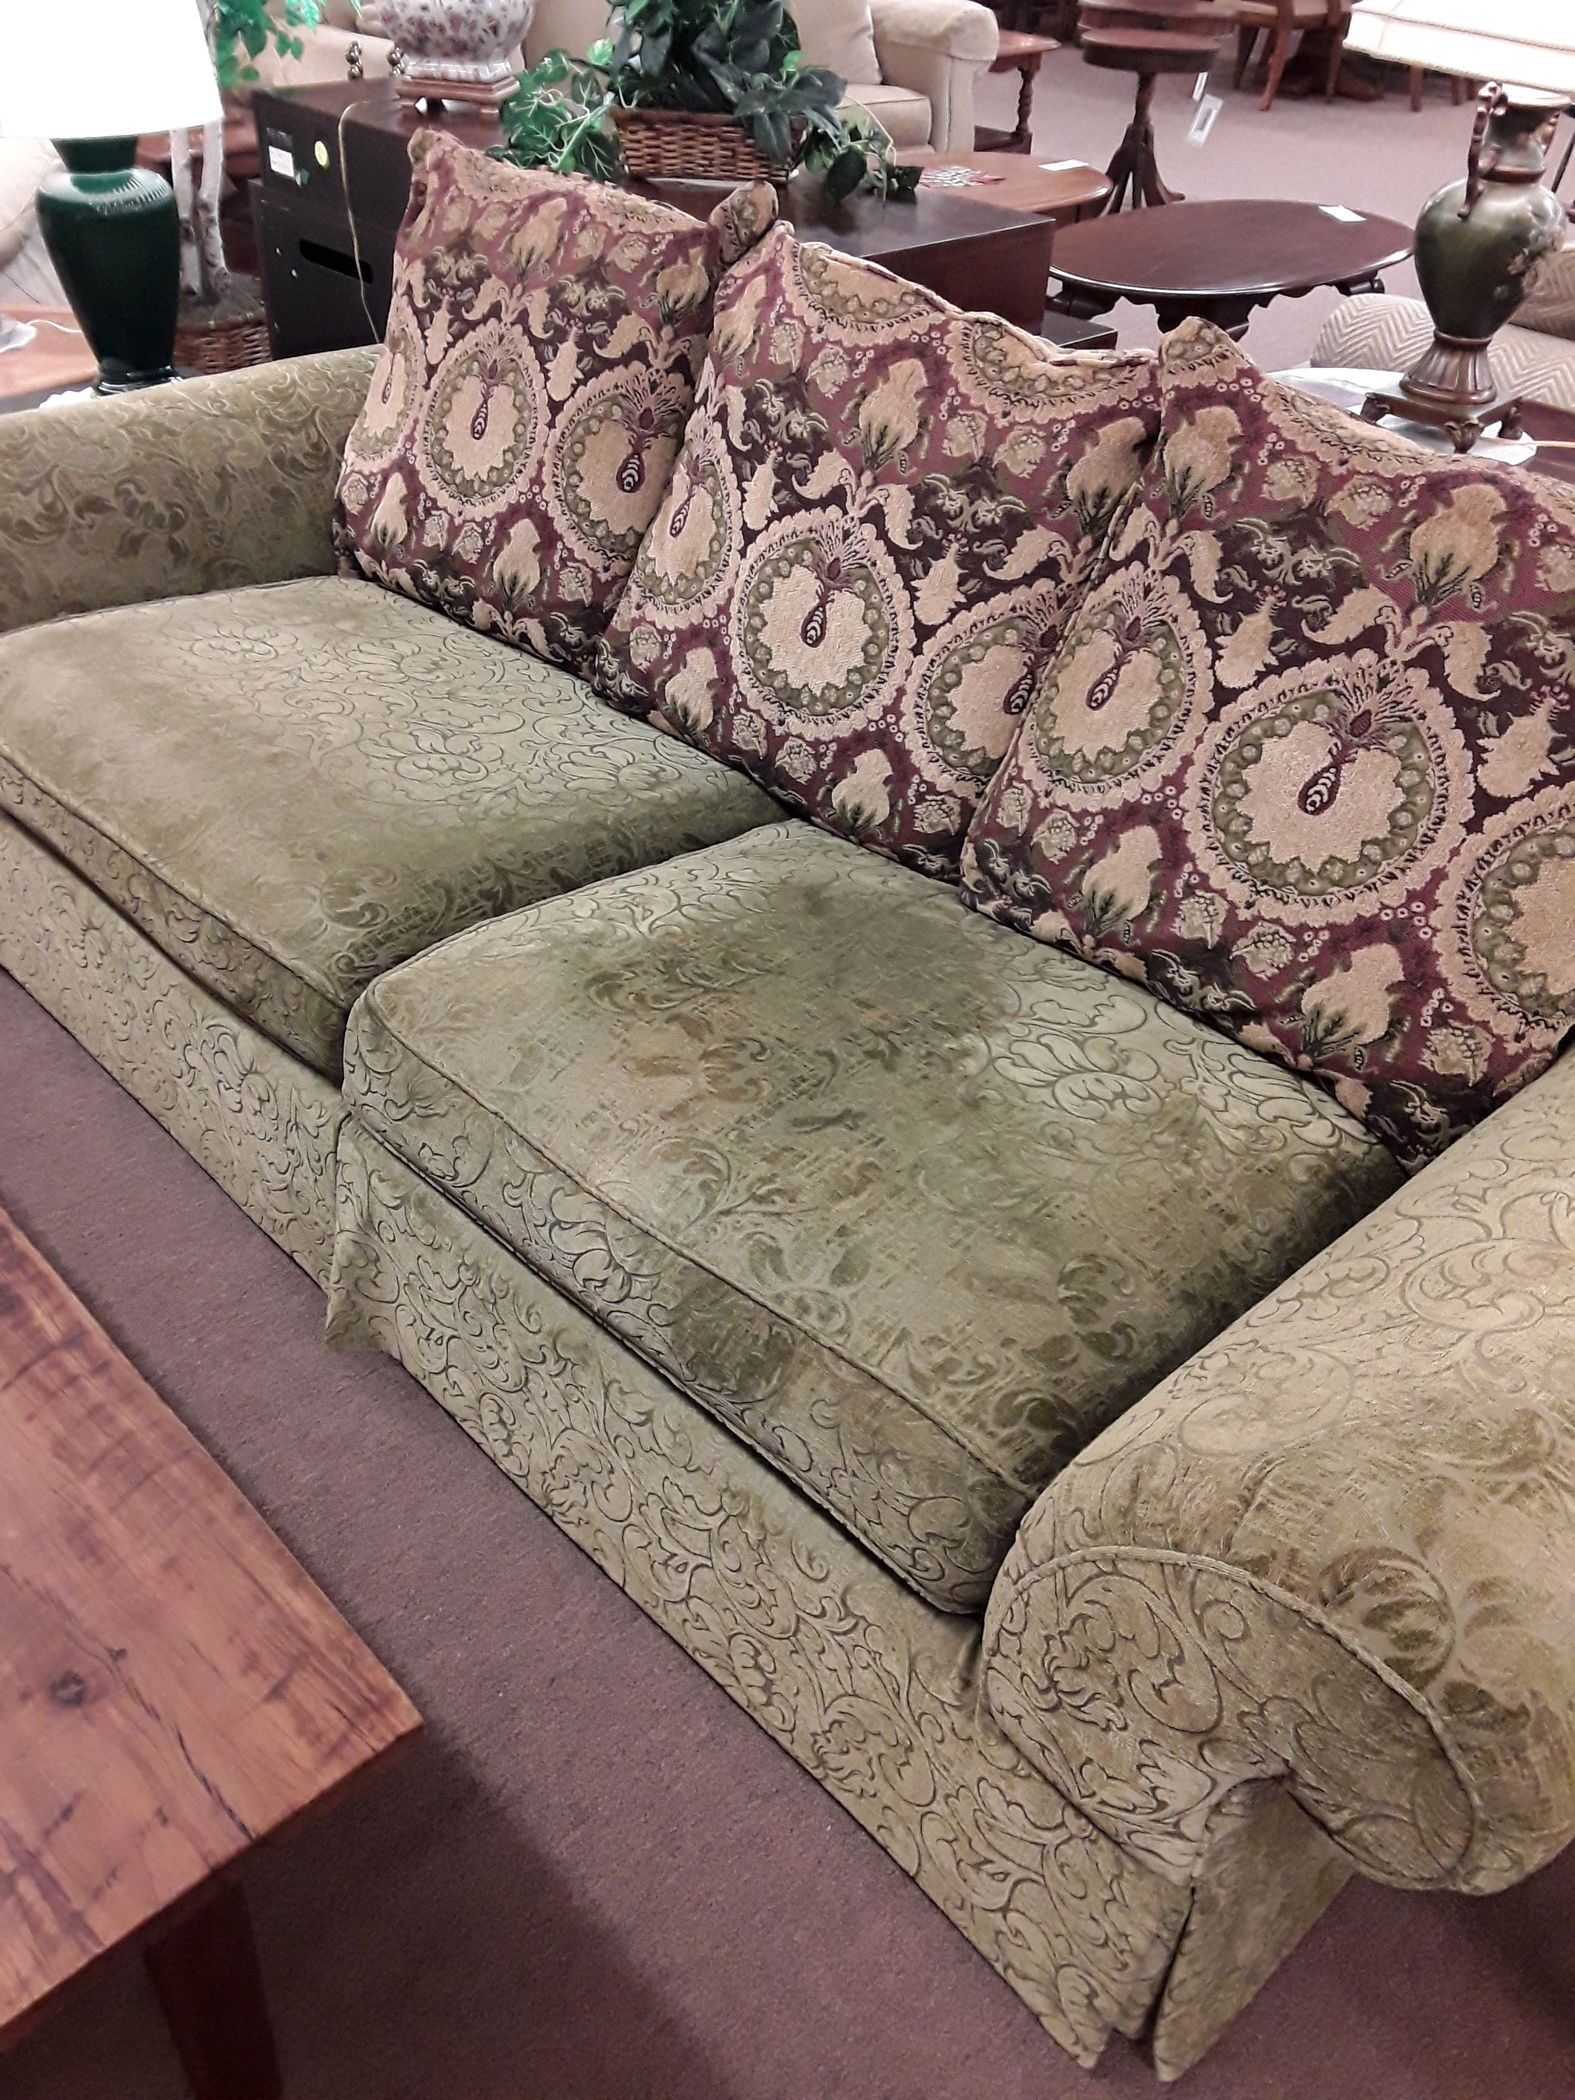 Thomasville Pillow Back Sofa | Delmarva Furniture Consignment With Regard To Sofas With Pillowback Wood Bases (Gallery 4 of 20)